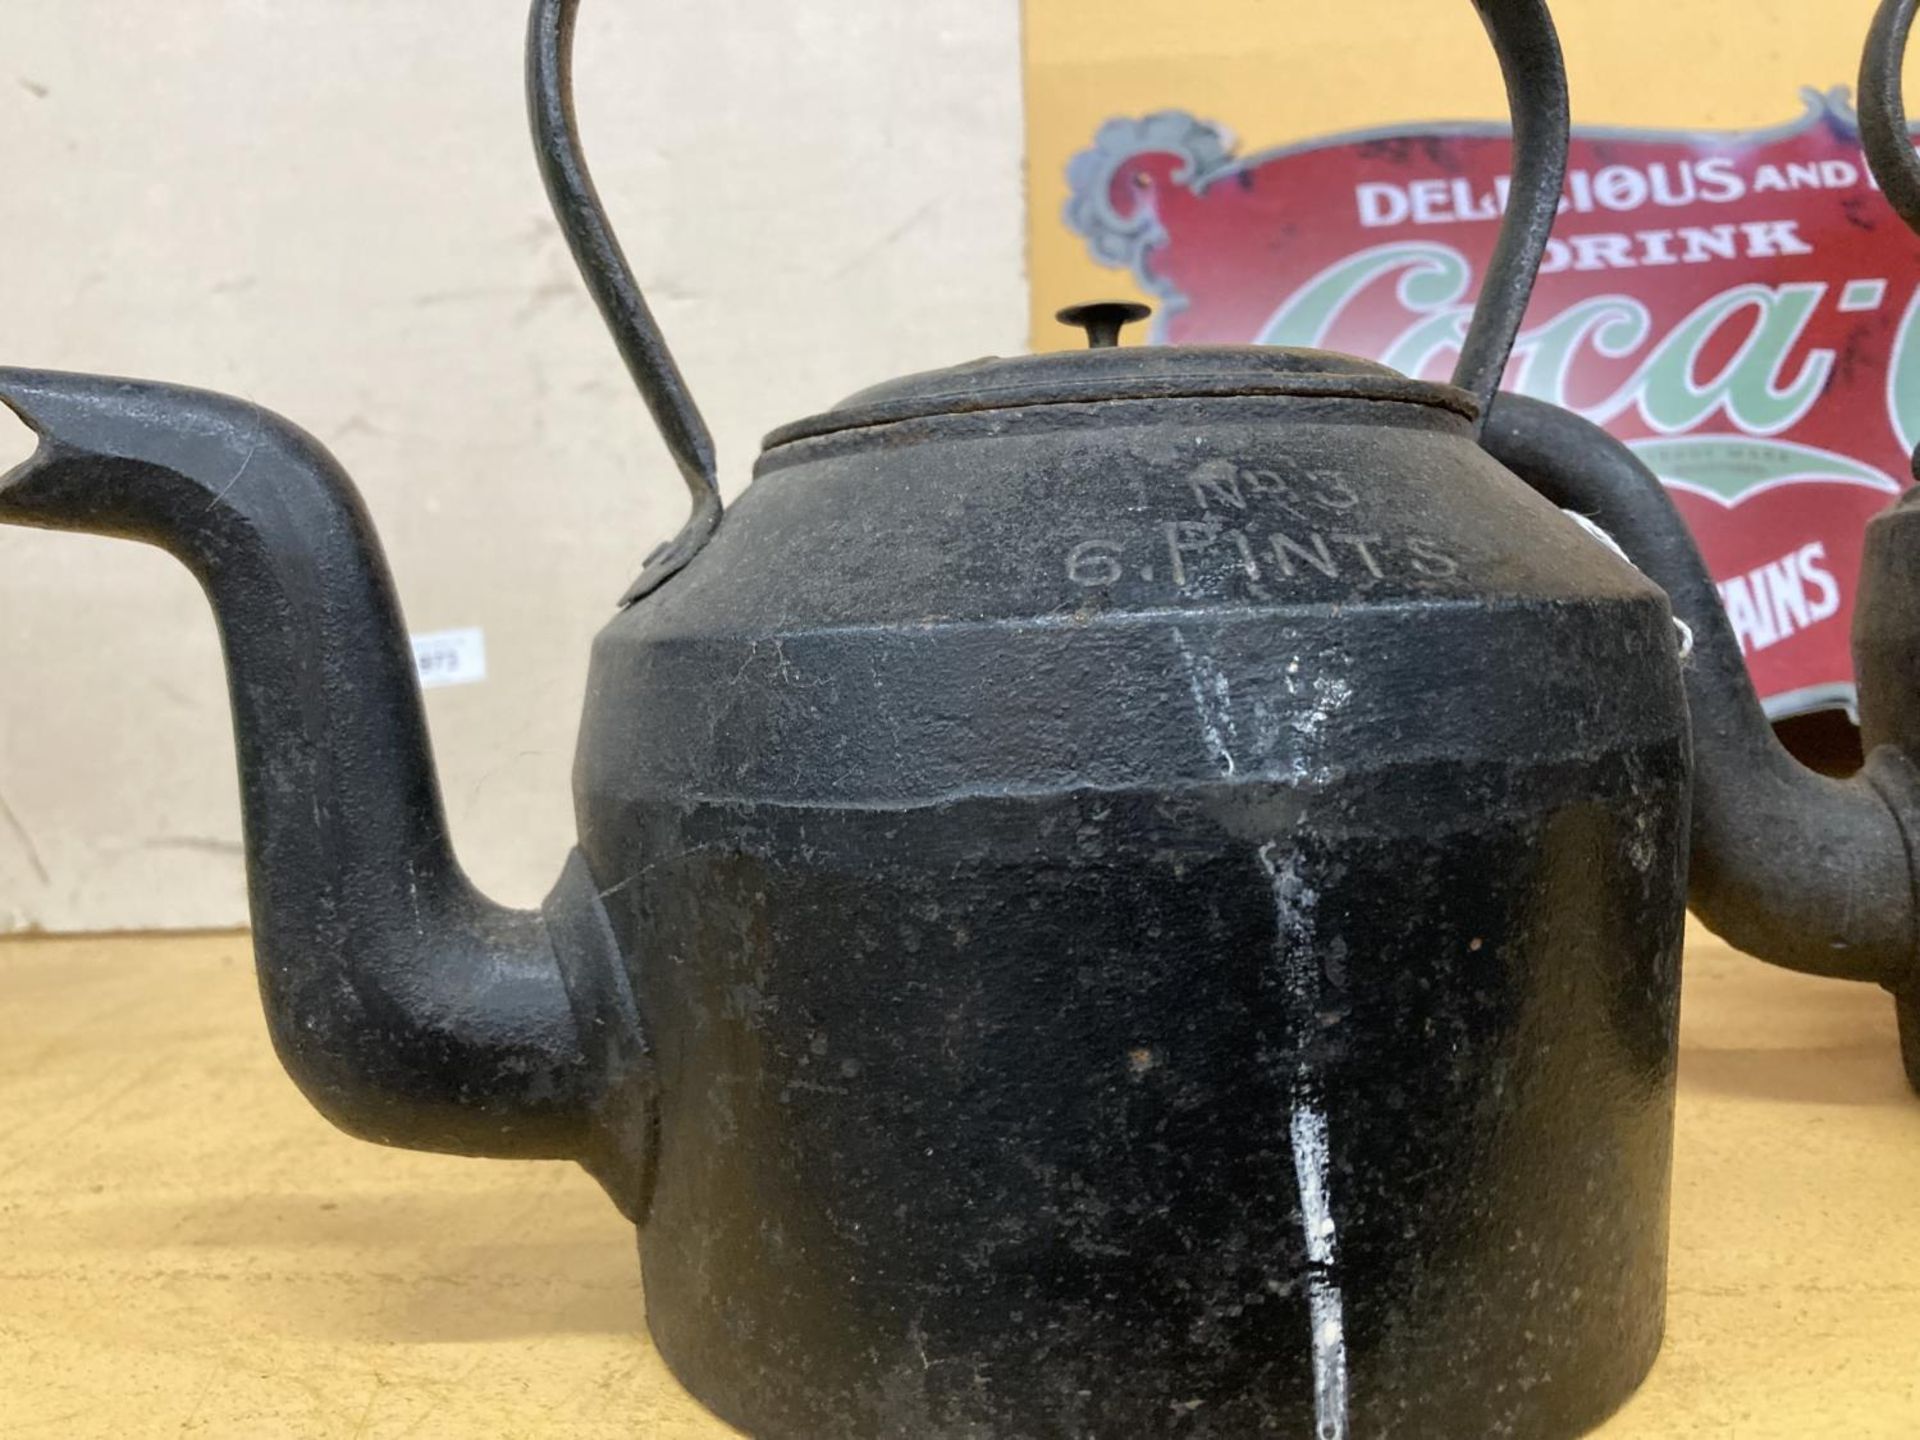 TWO VINTAGE CAST IRON KETTLES - ONE WITH MISSING LID - Image 6 of 8